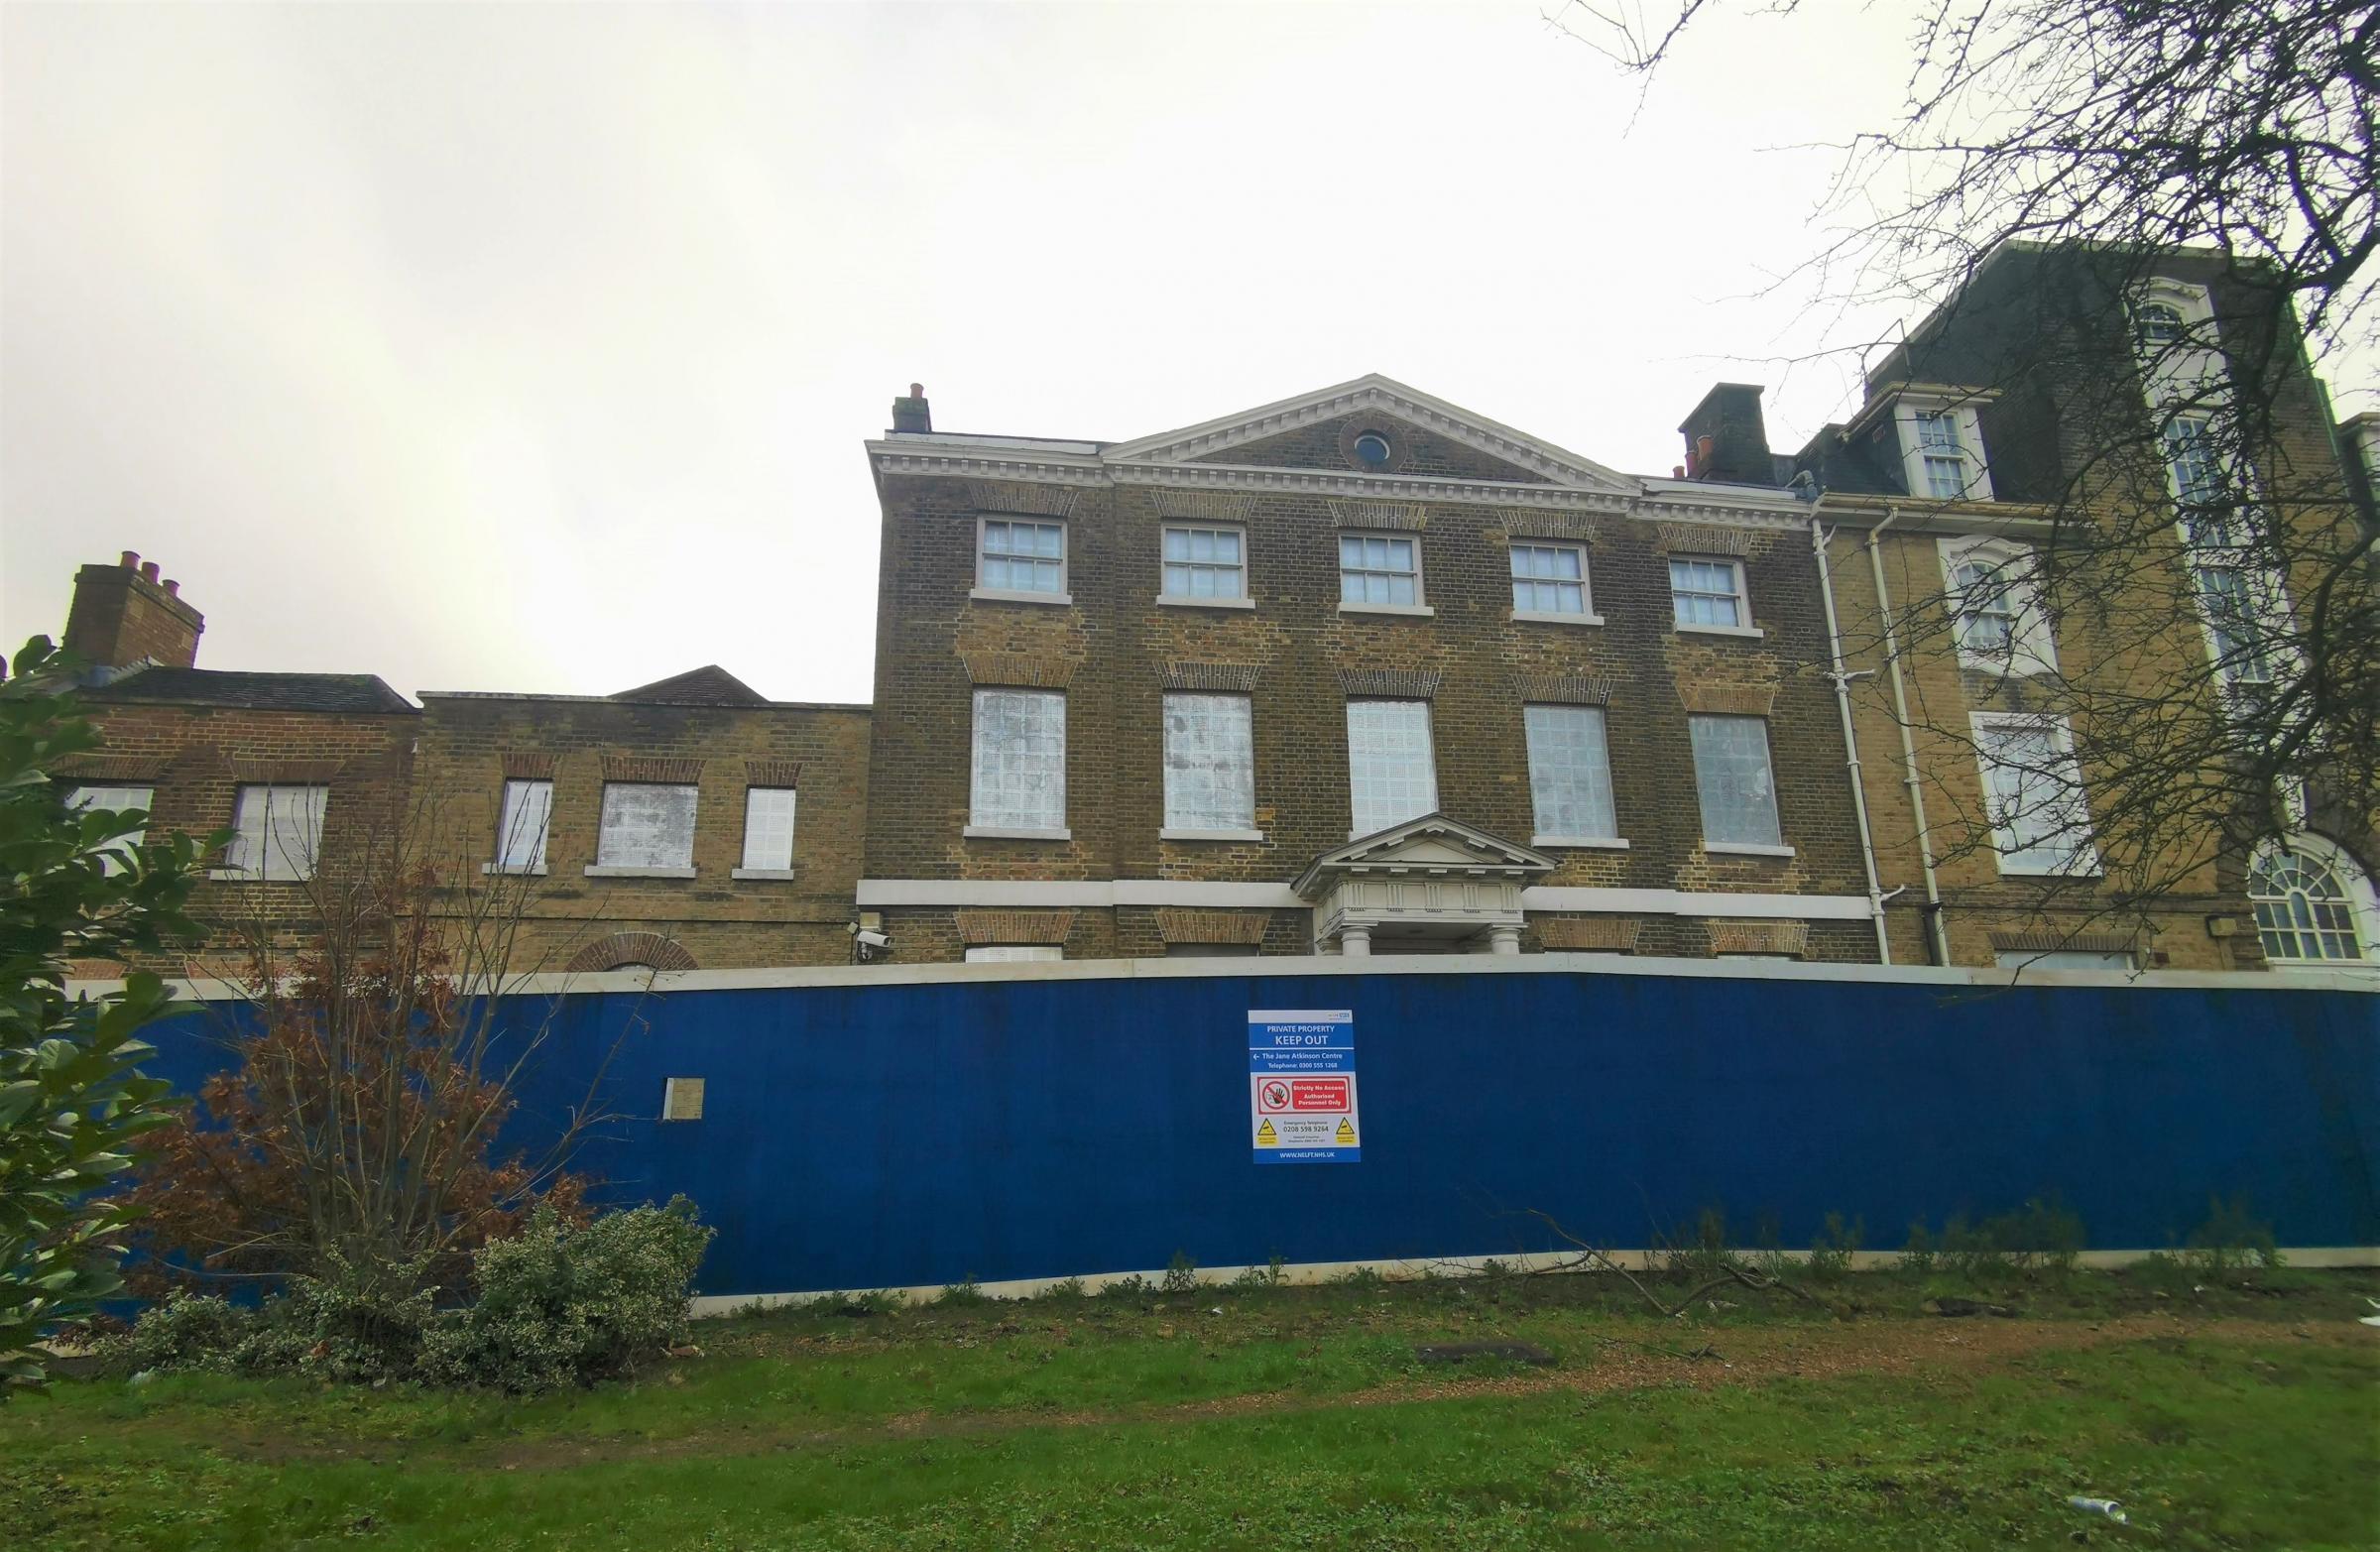 The site is currently boarded up